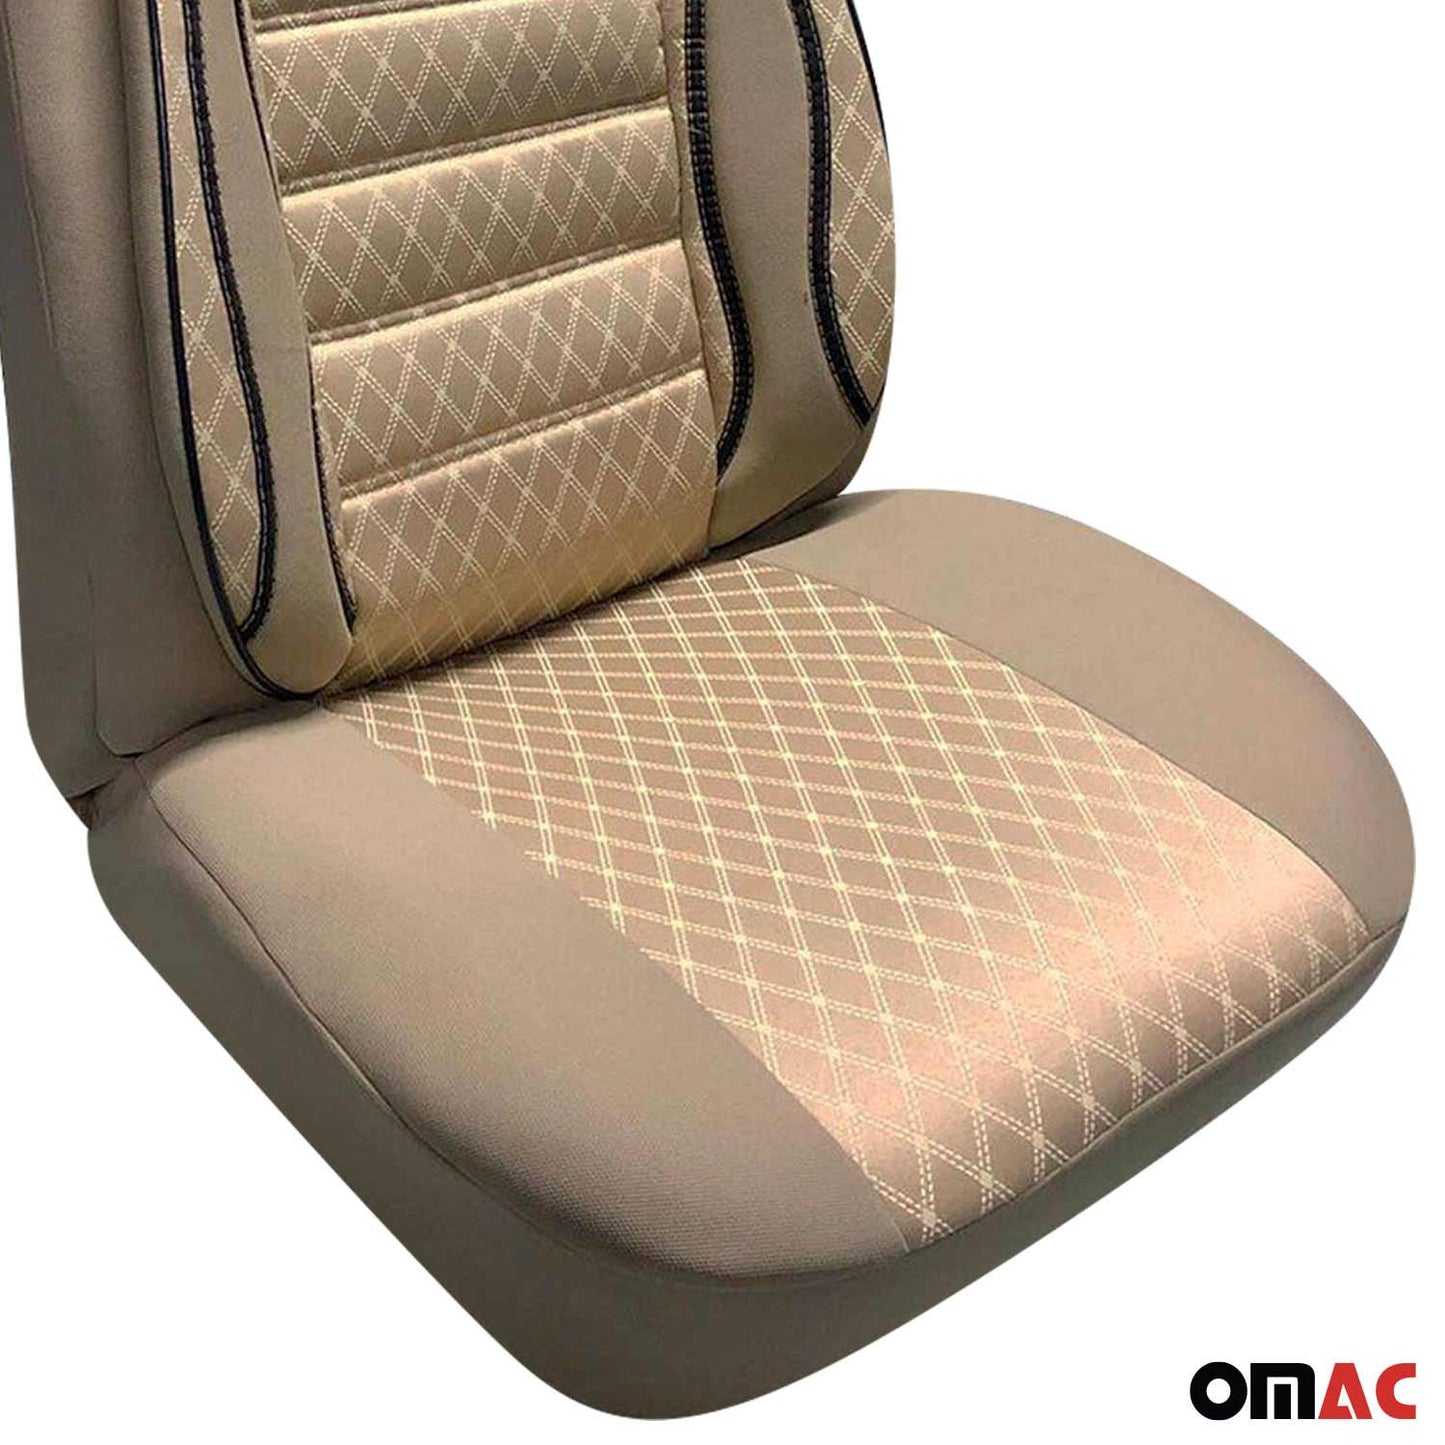 OMAC 2x Car Front Seat Cover Cushion Breathable Protection Non Slip Beige 96311ABB1-SET